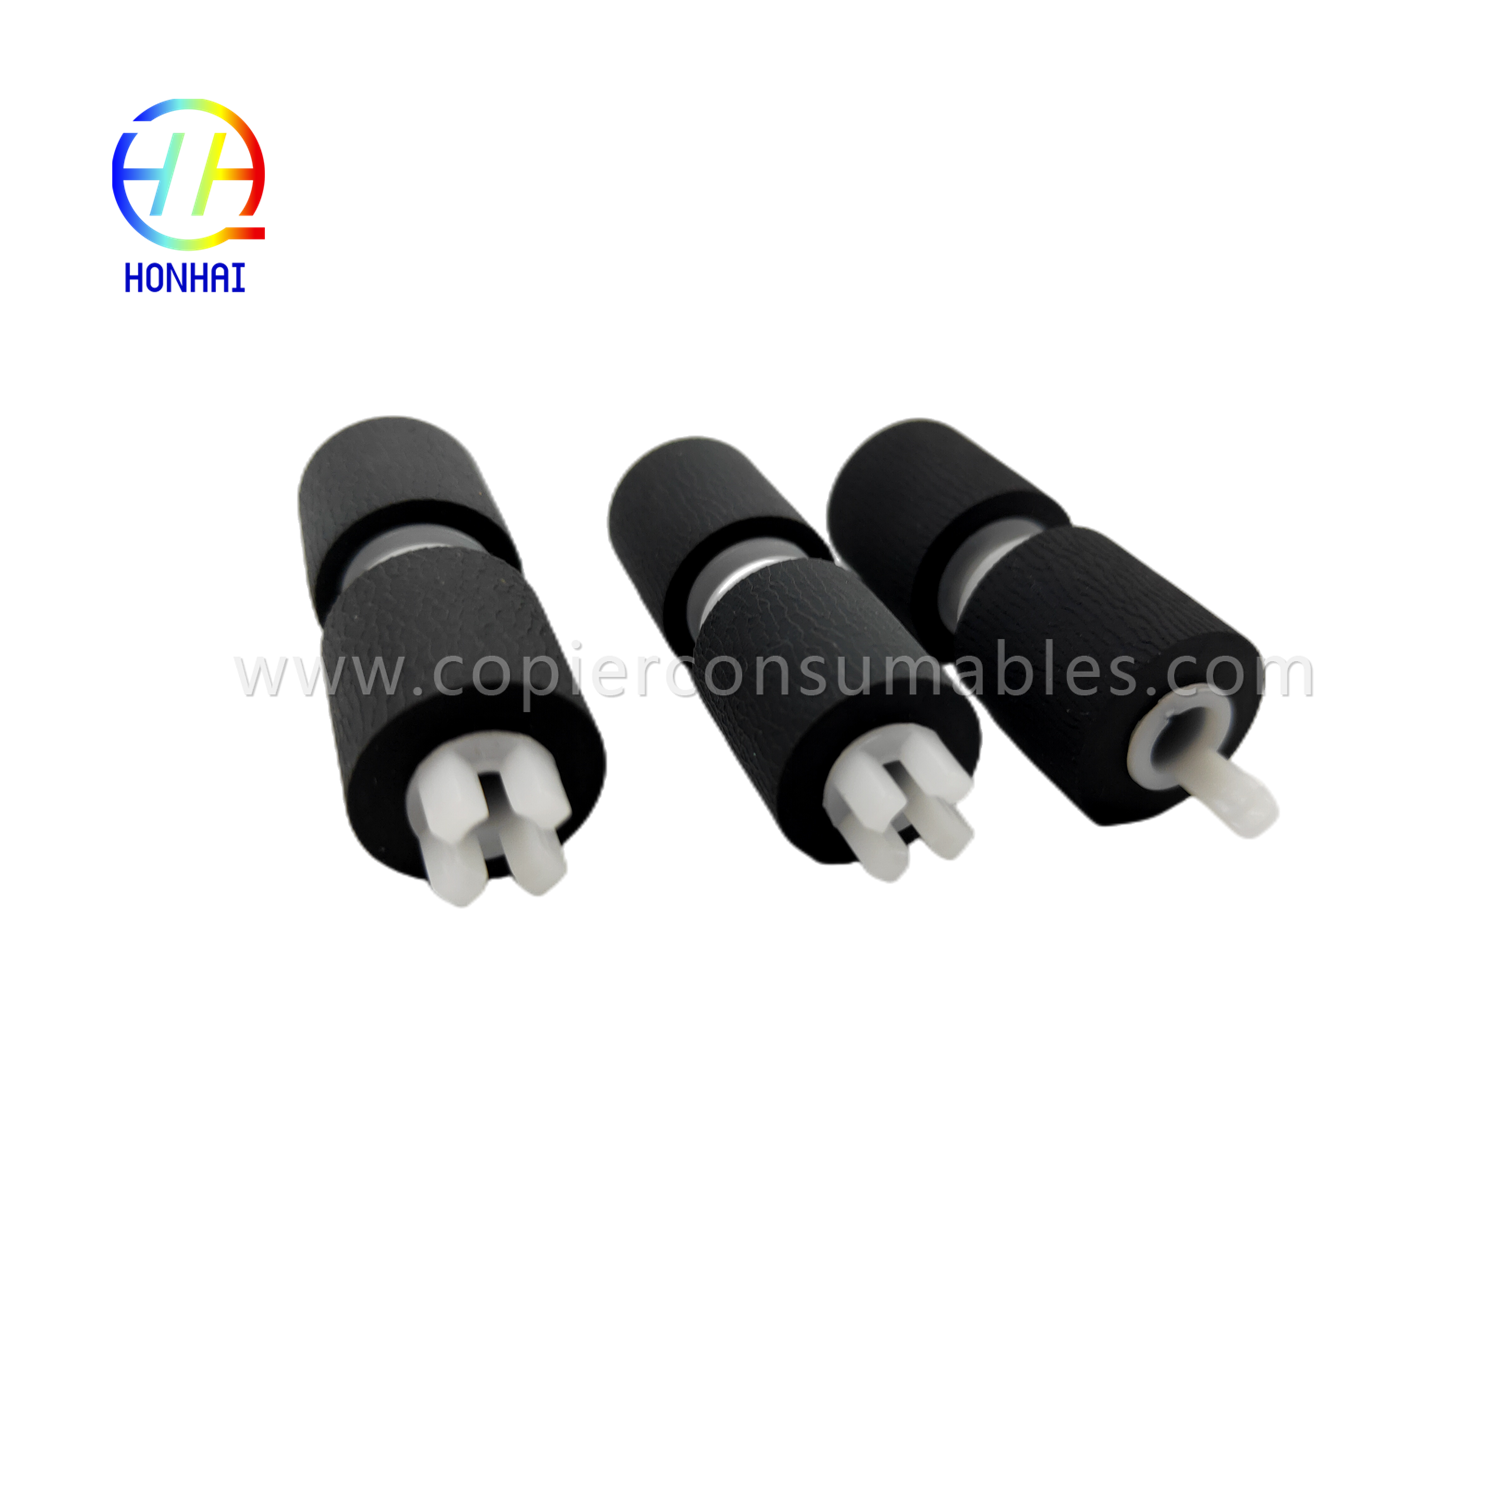 https://c585.goodao.net/apers-feed-kit-for-xerox-059k69800-workcentre-5632-5645-5687-5865-wc5865-pick-up-feed-roller-kit-product/